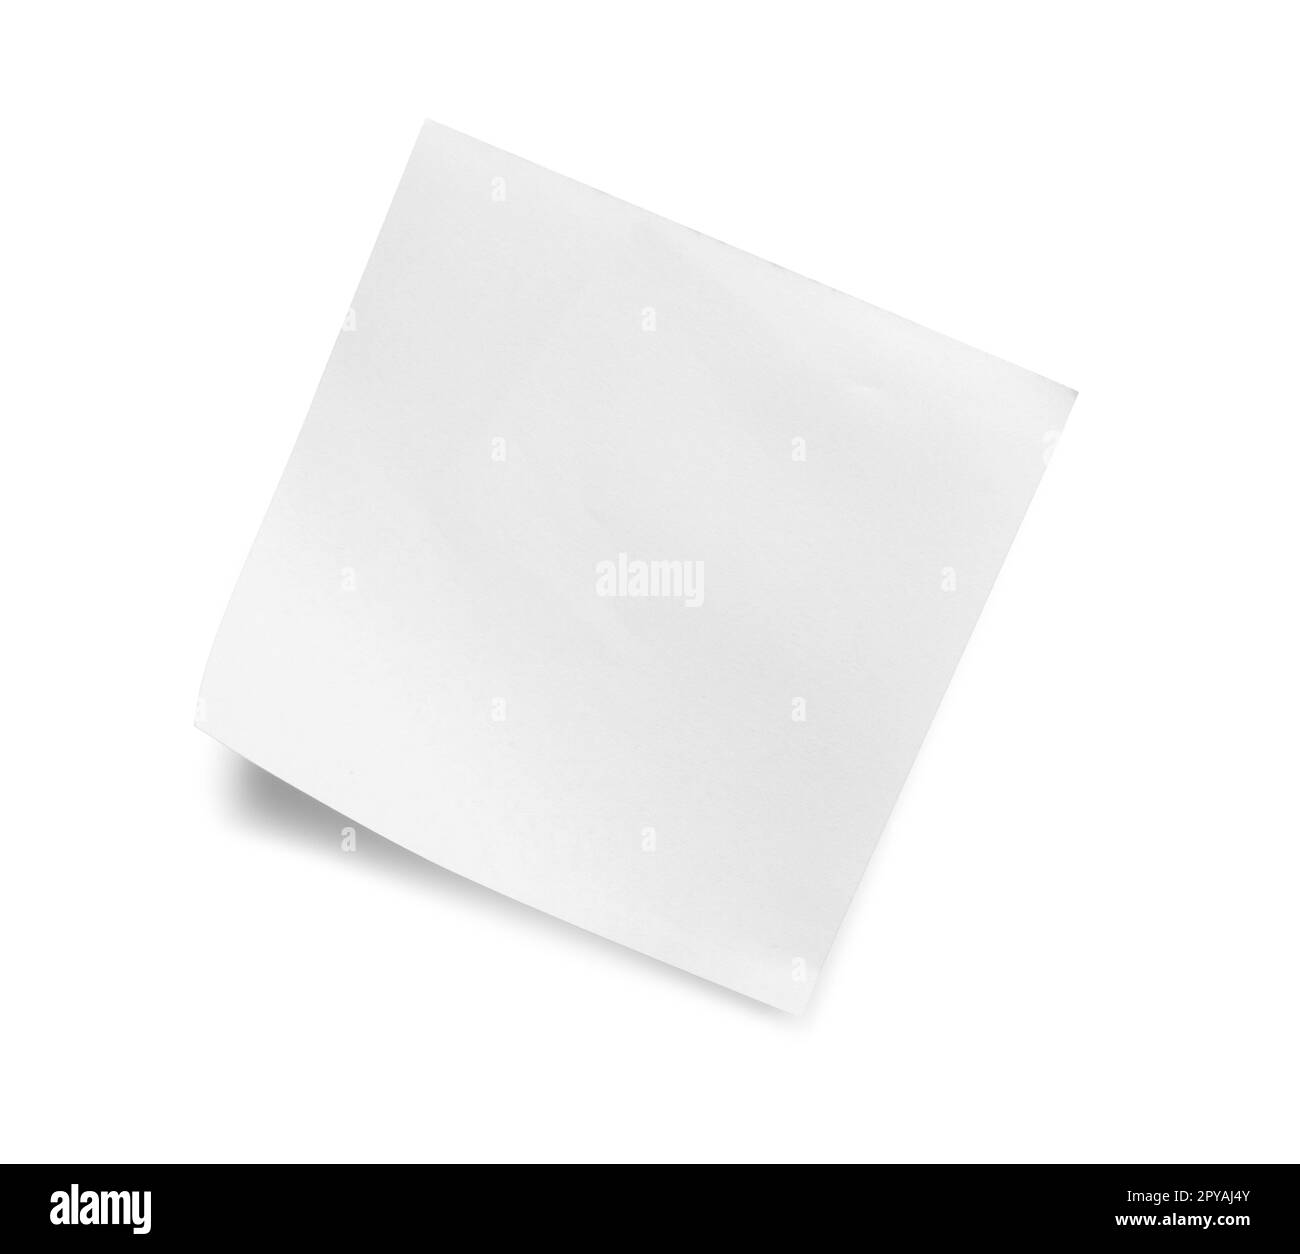 Blank sticky note on white background, top view Stock Photo